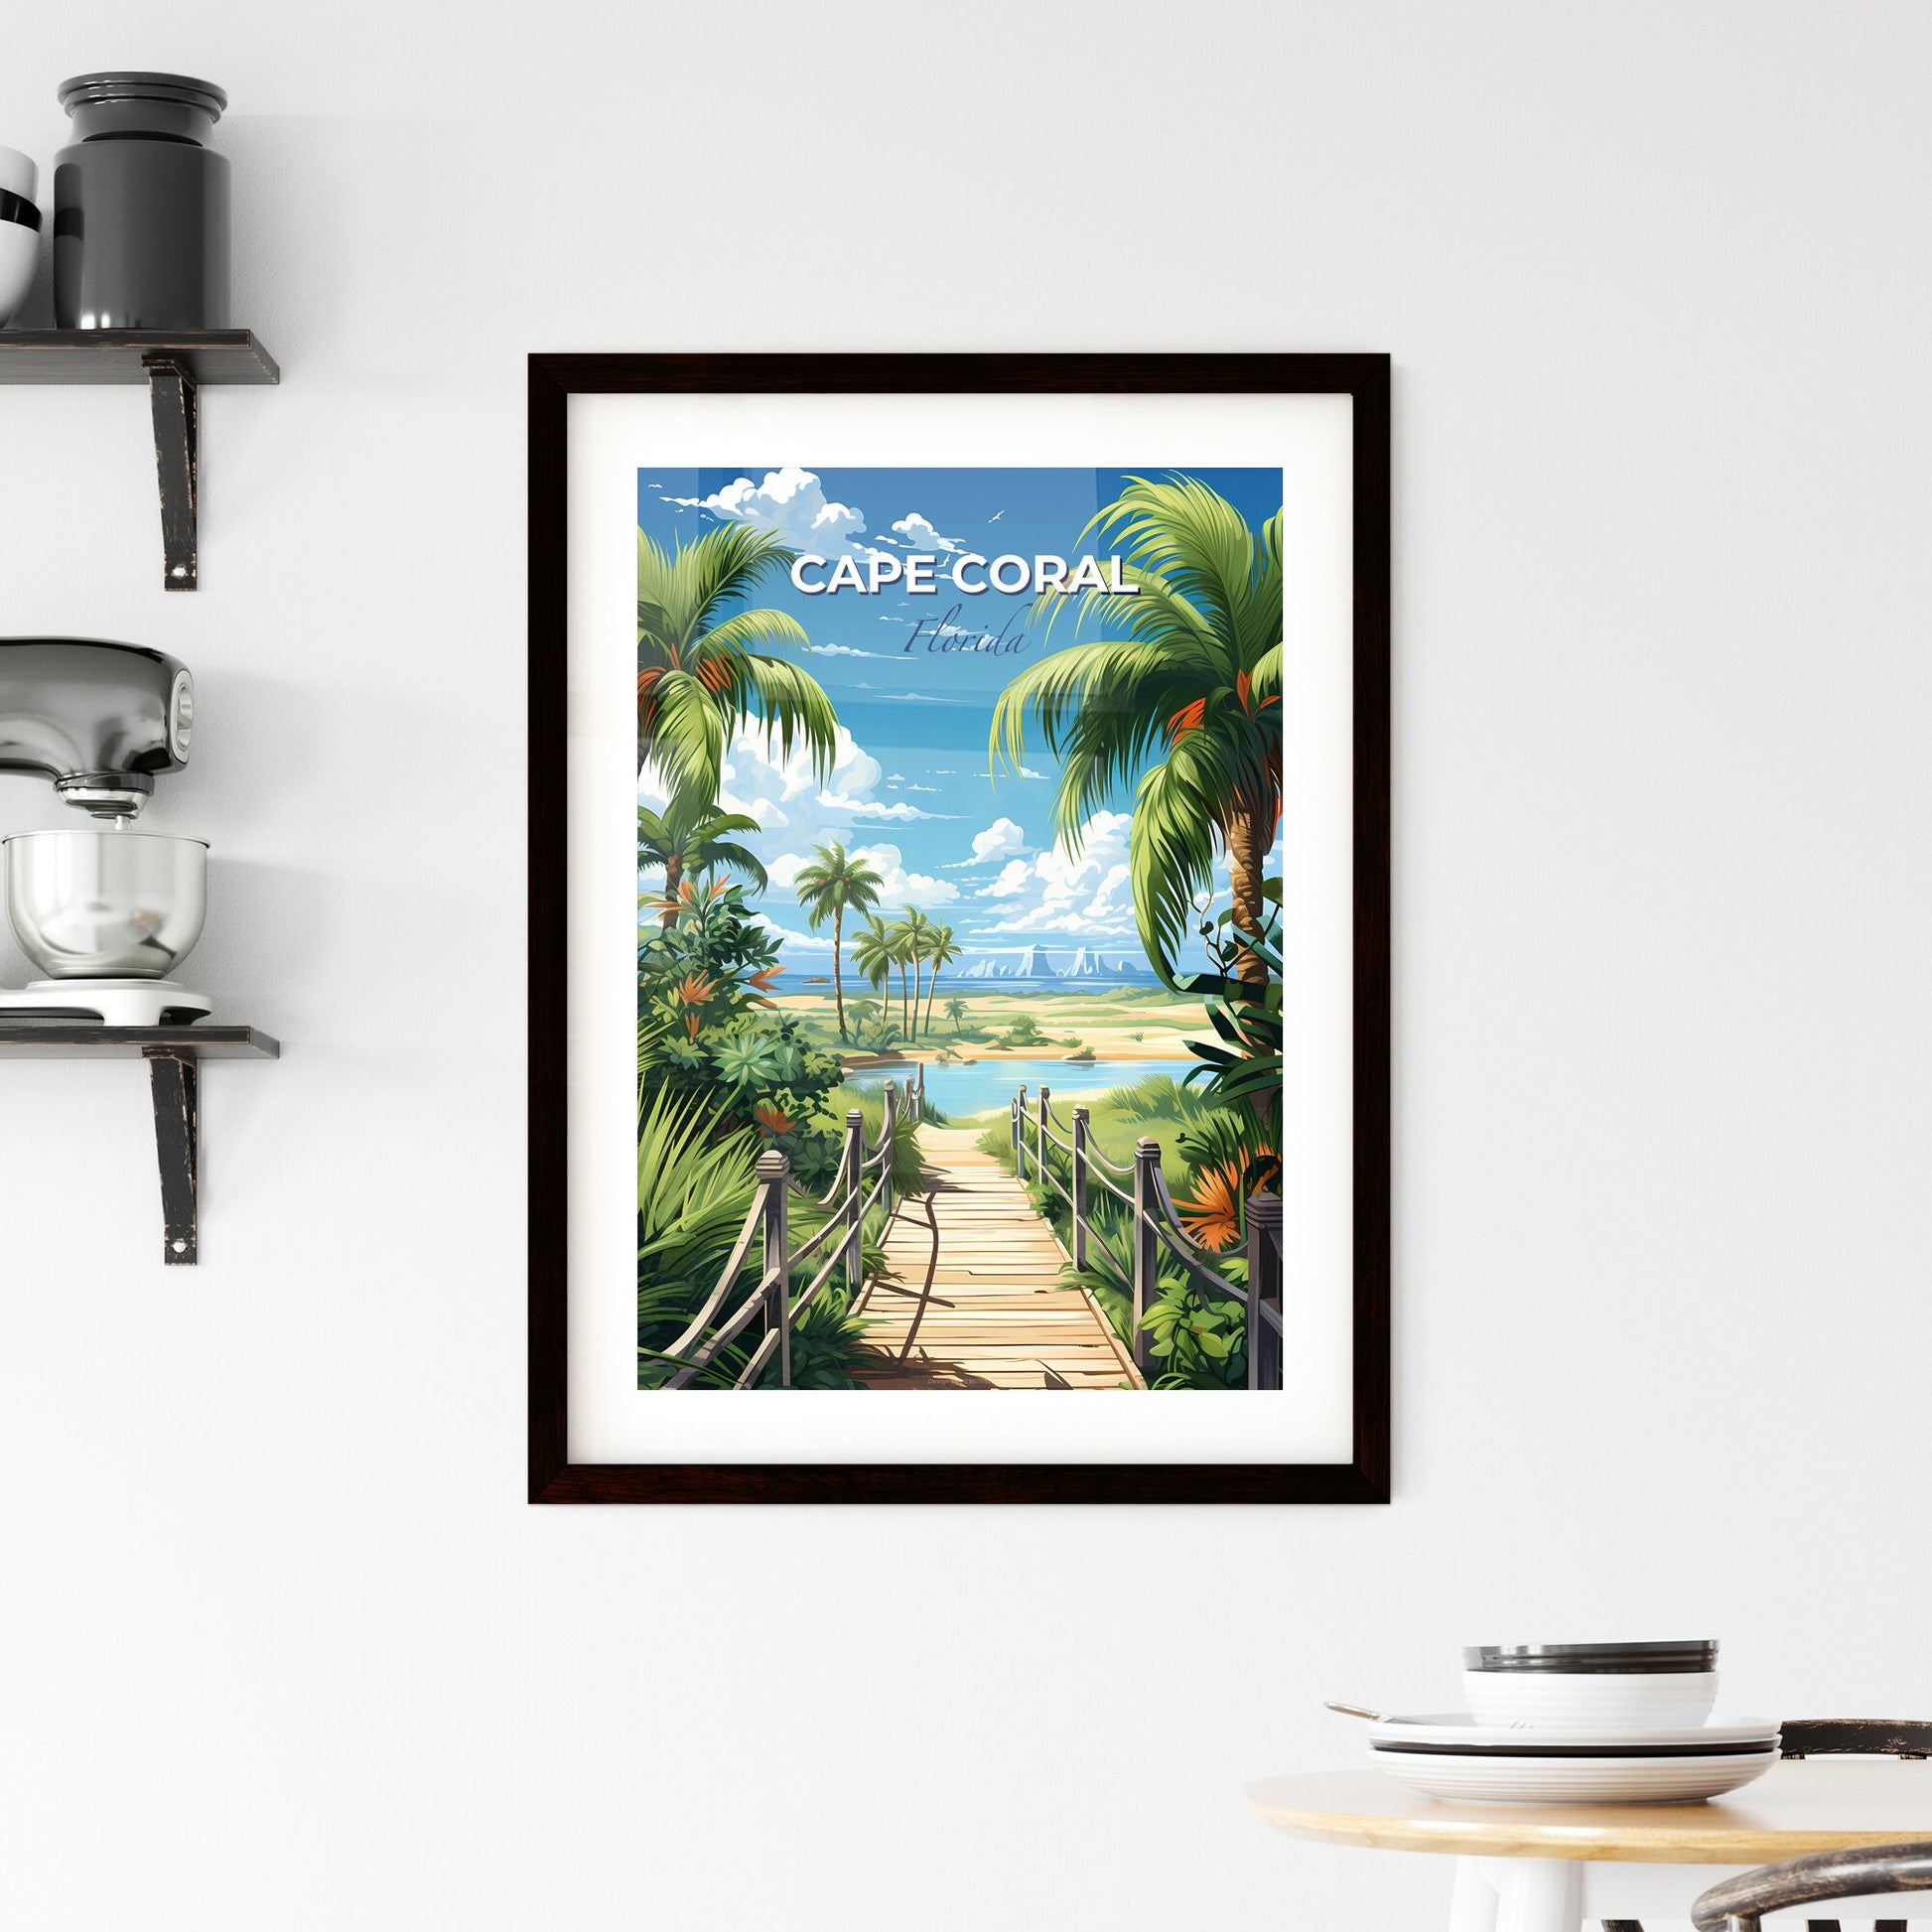 Cape Coral, Florida, A Poster of a wood bridge leading to a beach Default Title